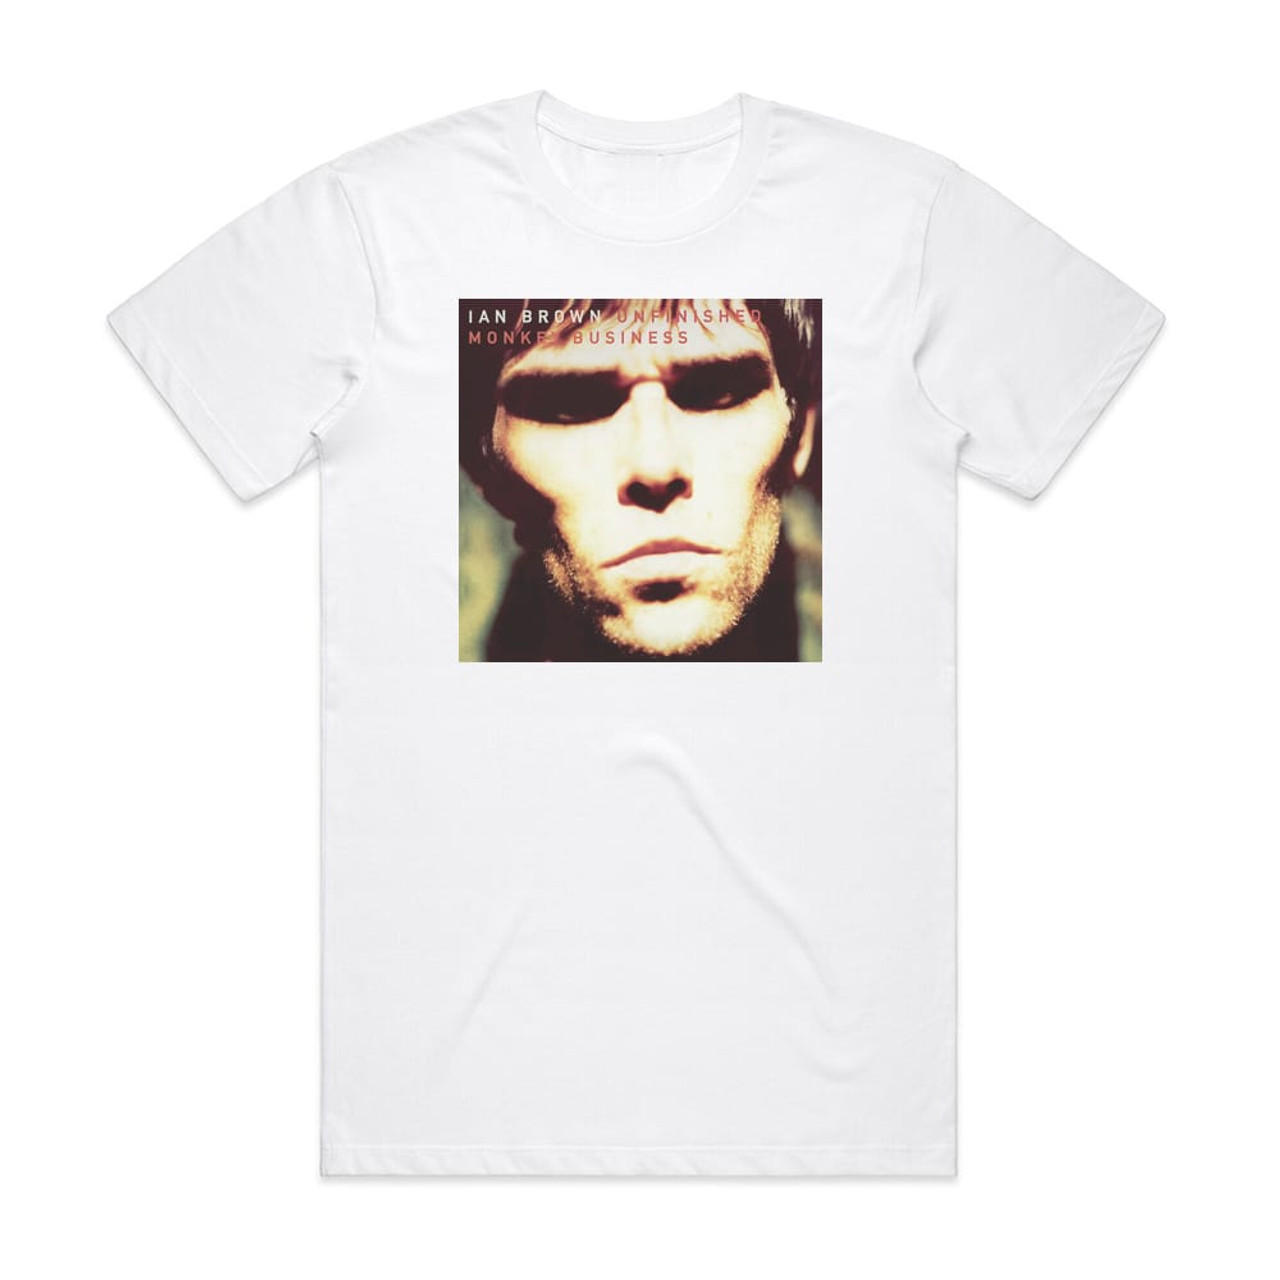 Ian Brown Unfinished Monkey Business Album Cover T-Shirt White